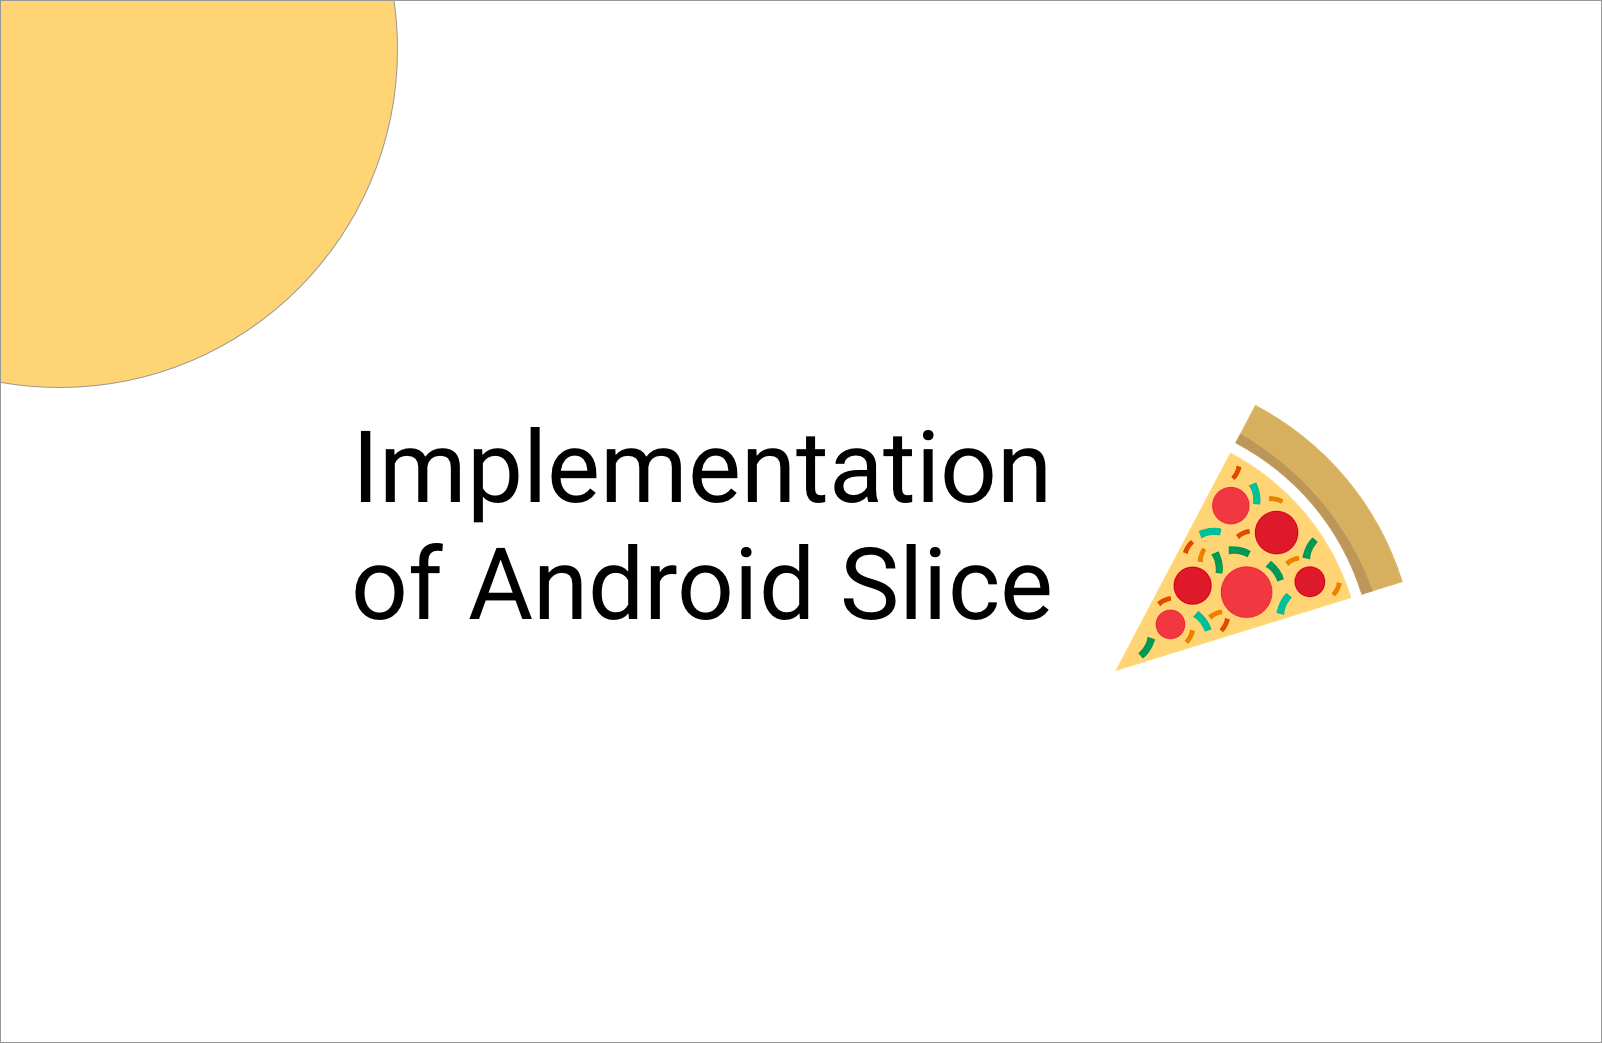 Implementing Android Slice